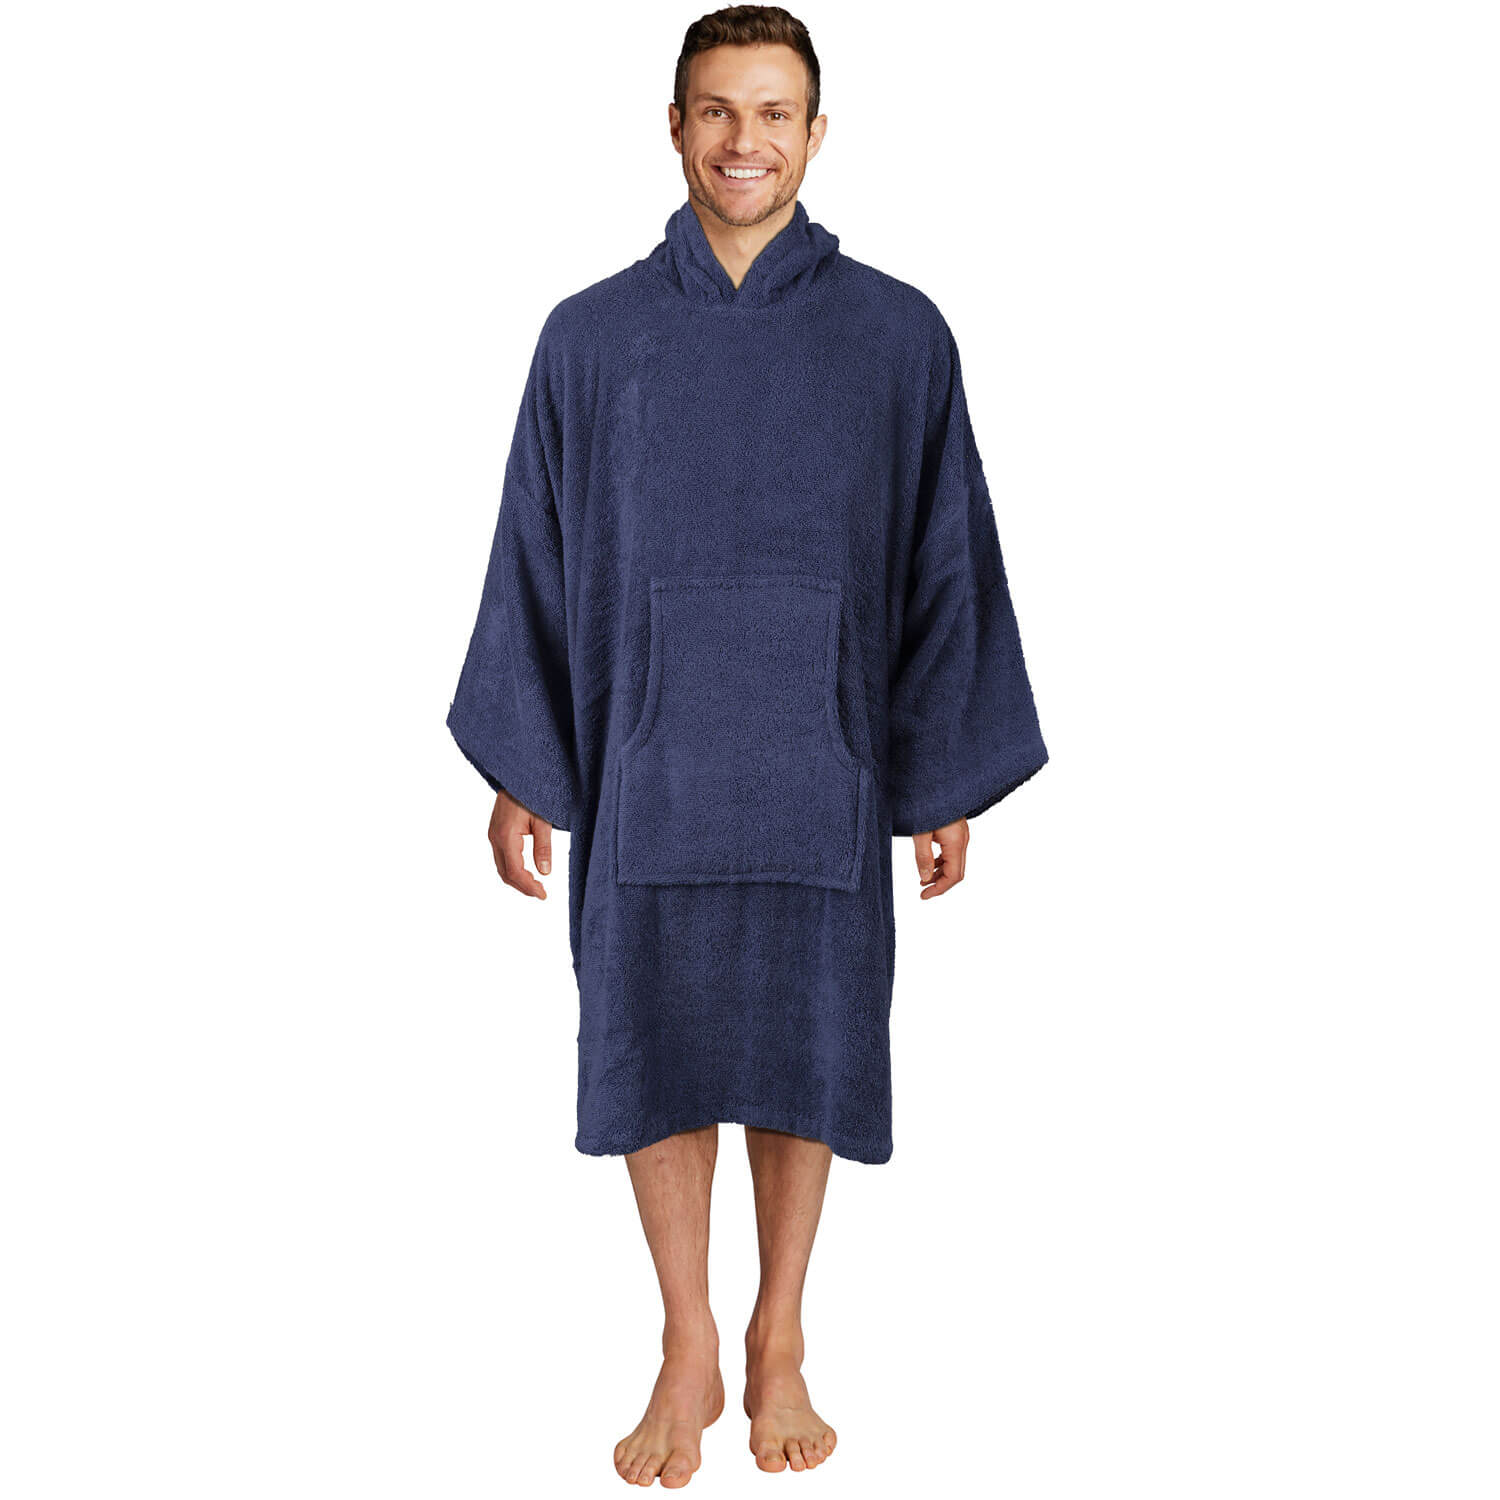 The Home Collection Adult Long Sleeve Poncho - Medium - Navy 1 Shaws Department Stores